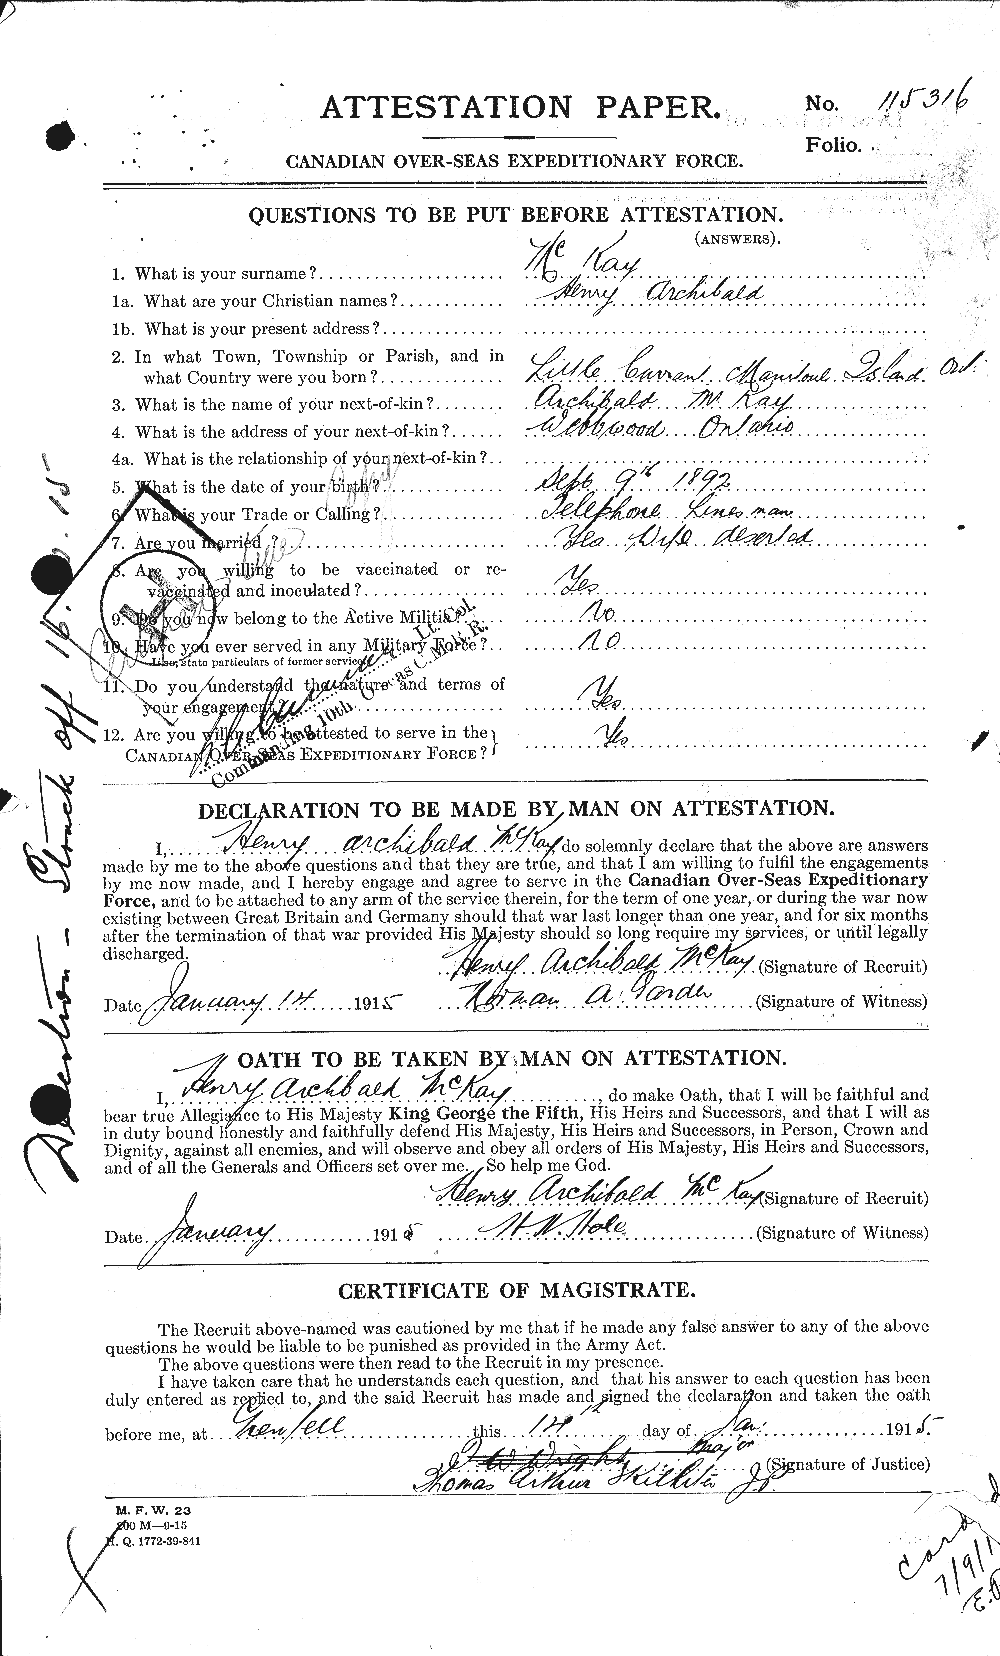 Personnel Records of the First World War - CEF 534746a